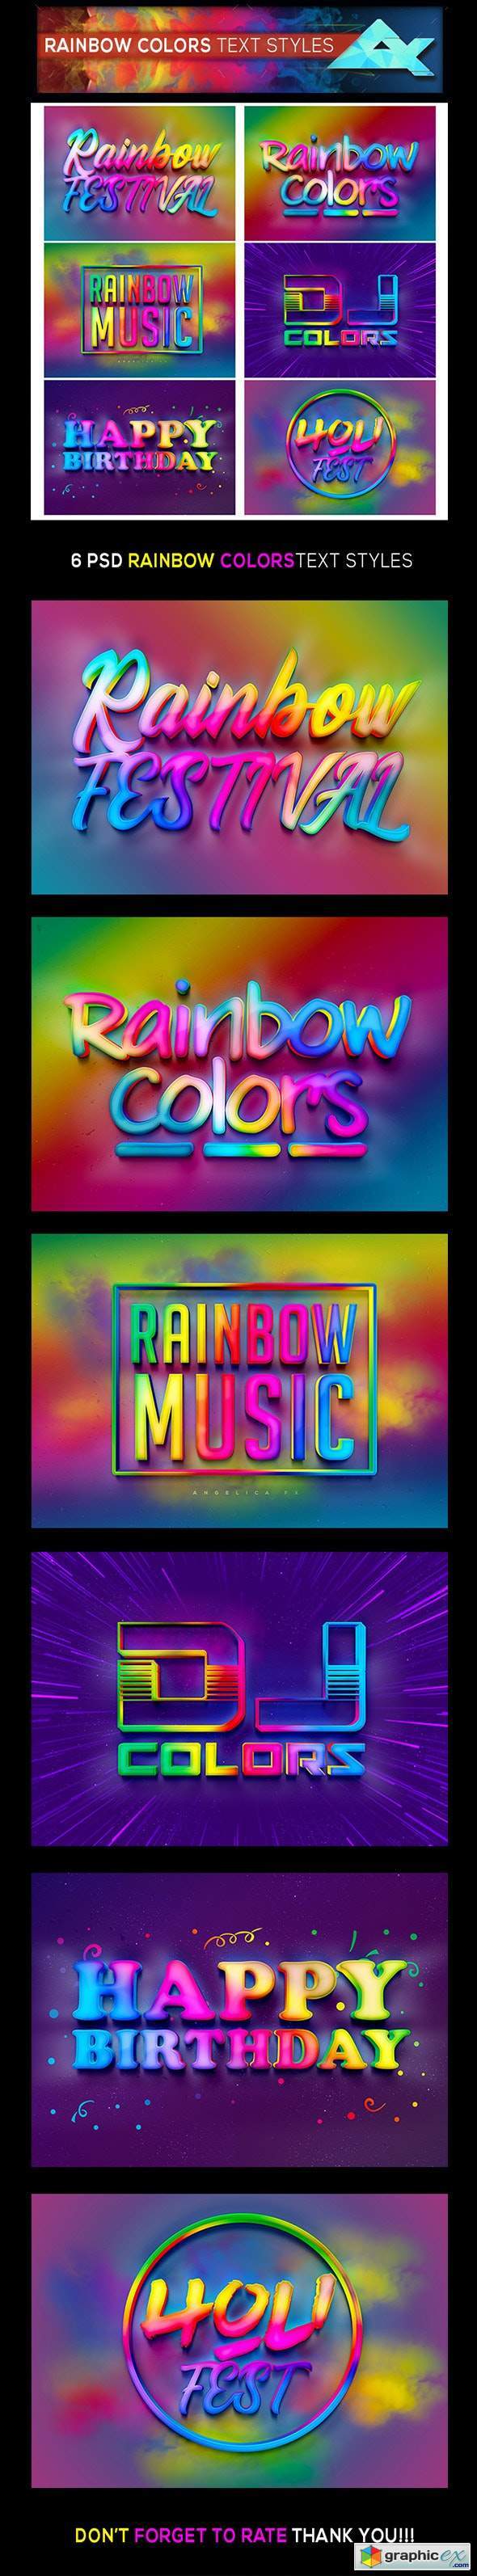 Rainbow Colors Photoshop Text Effects Styles